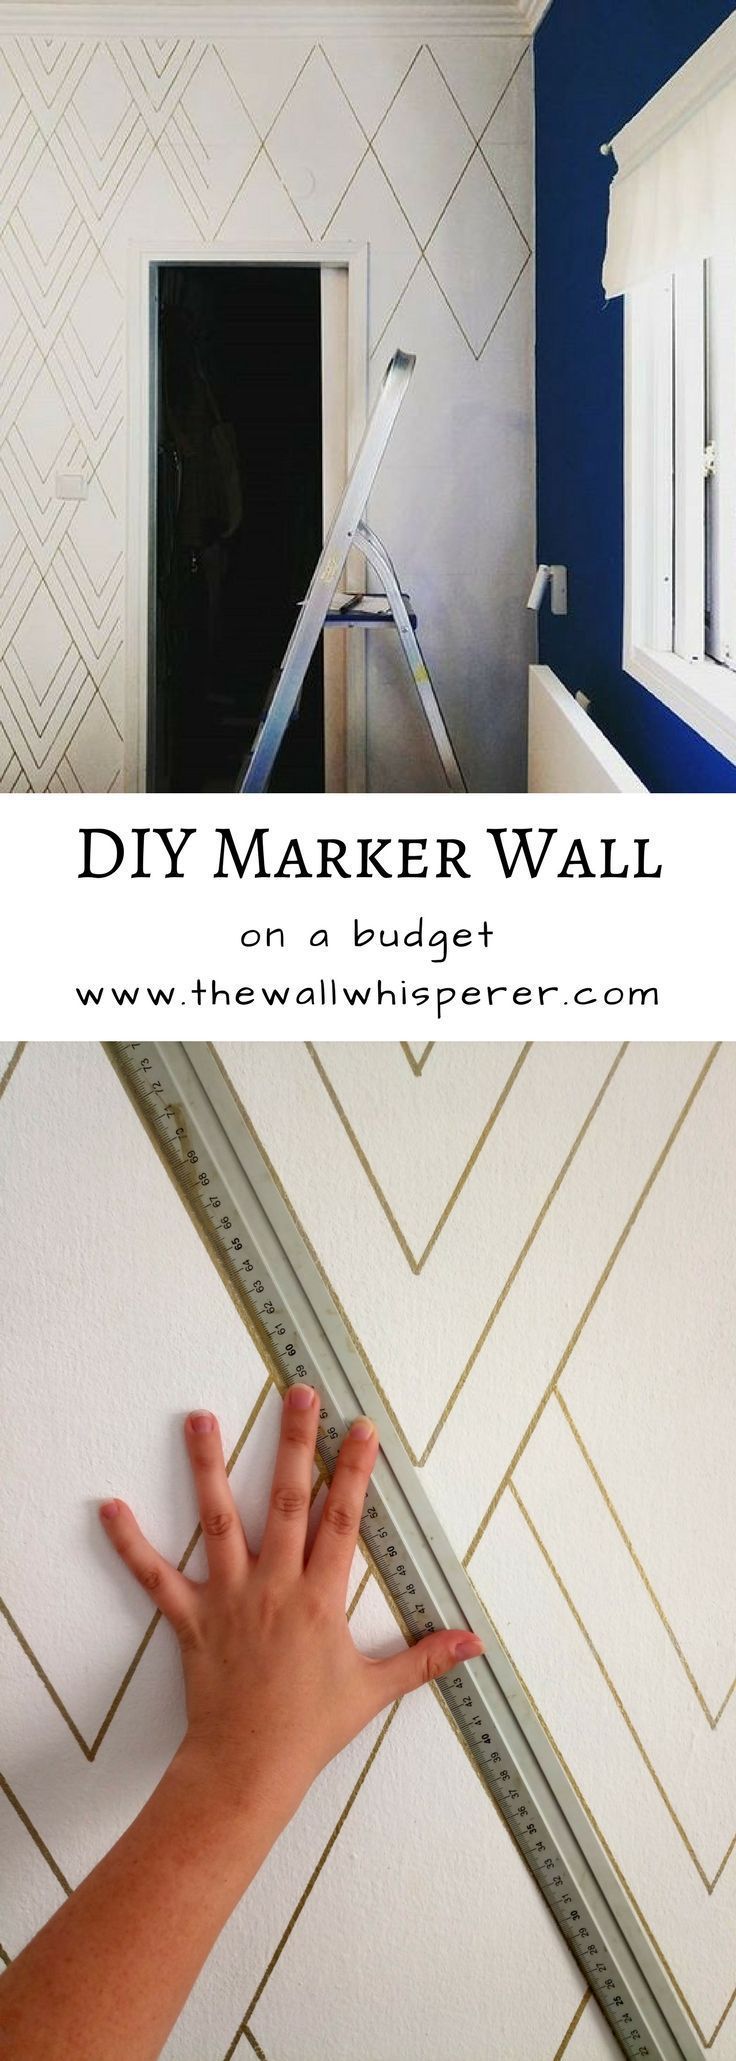 Accent wall - DIY faux wallpaper project - cheap and quick -   15 home accents DIY projects ideas